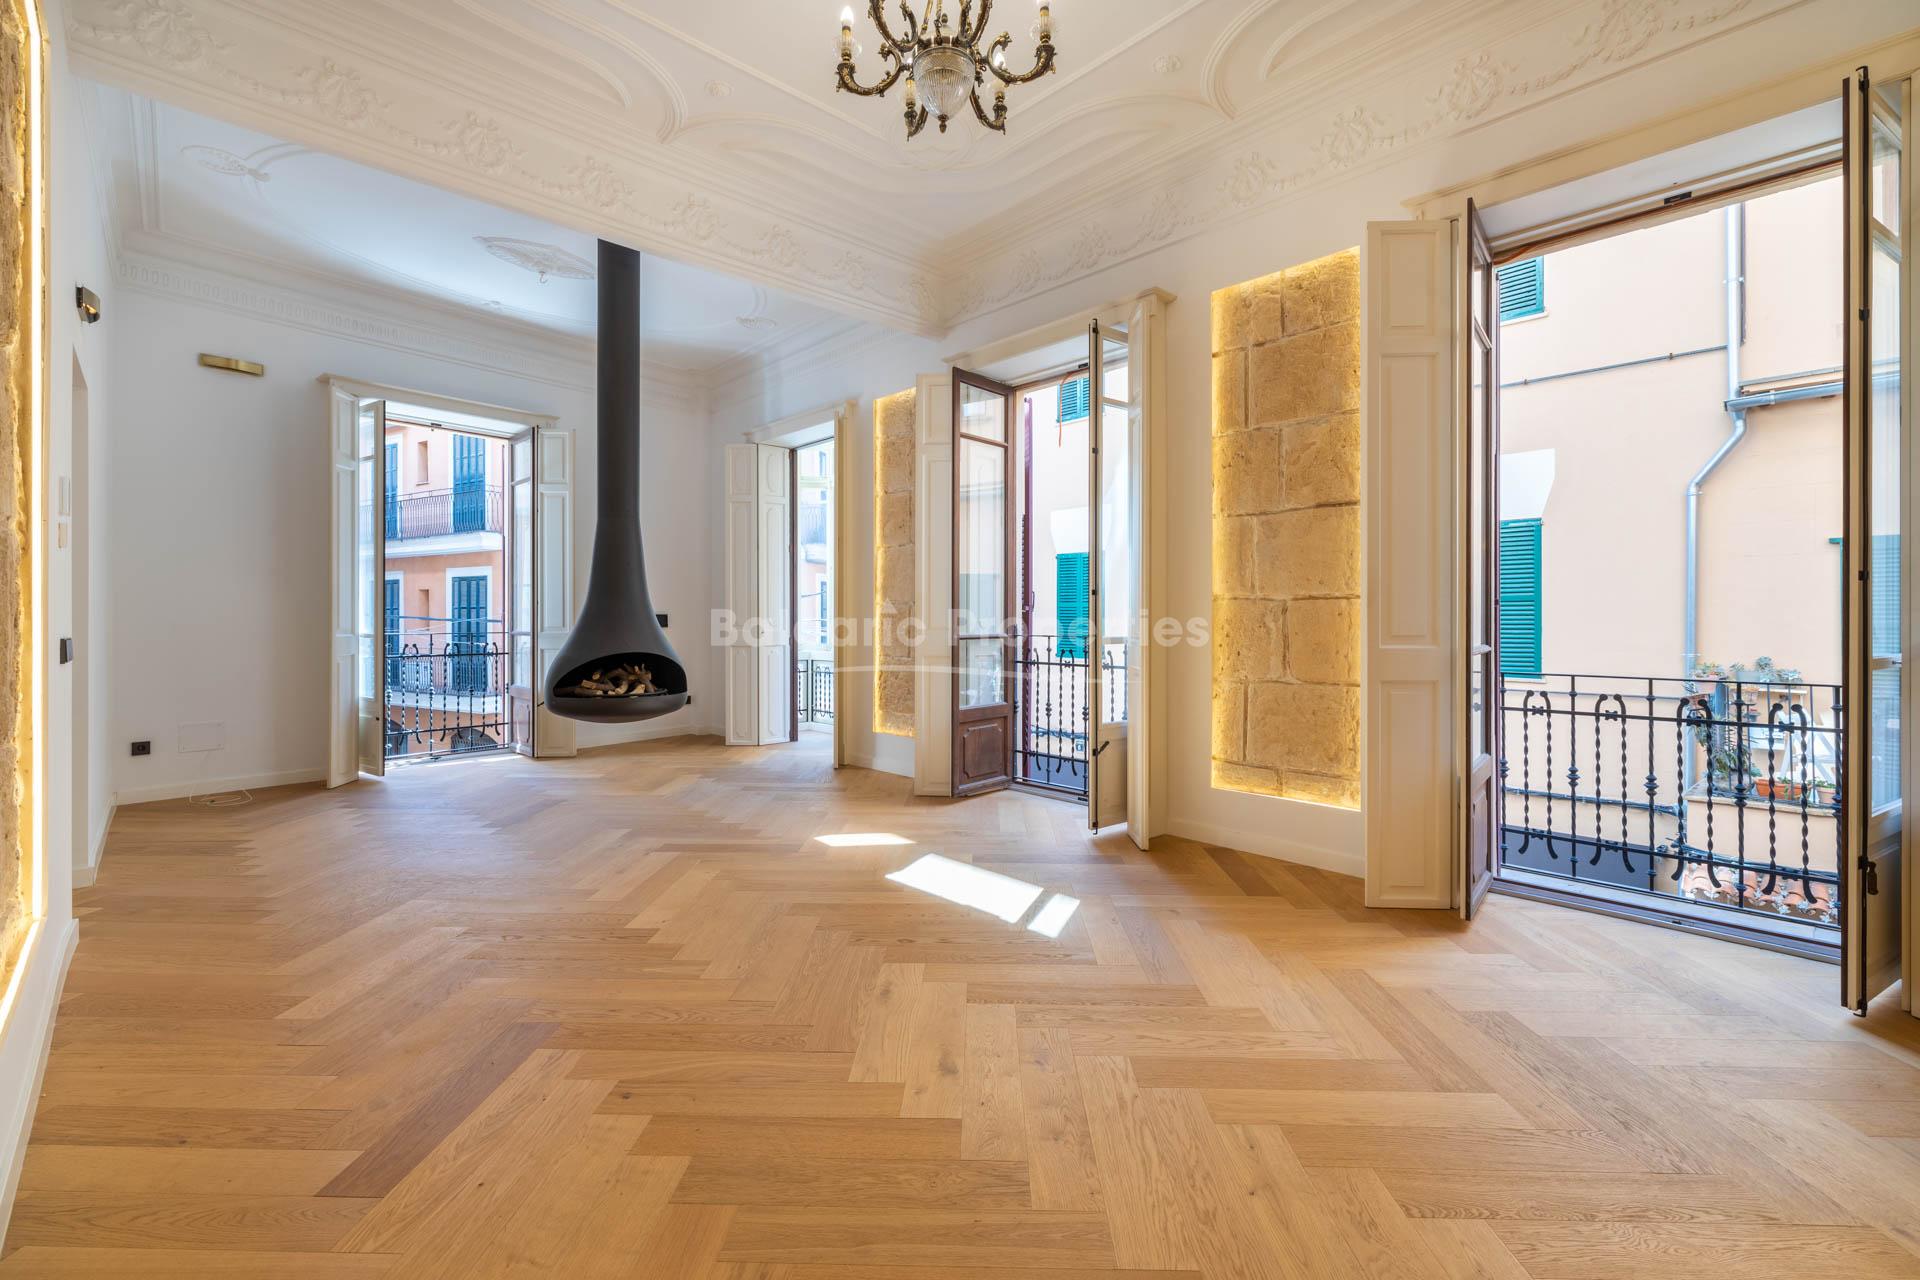 Wonderful, refurbished apartment for sale in Palma old town, Mallorca